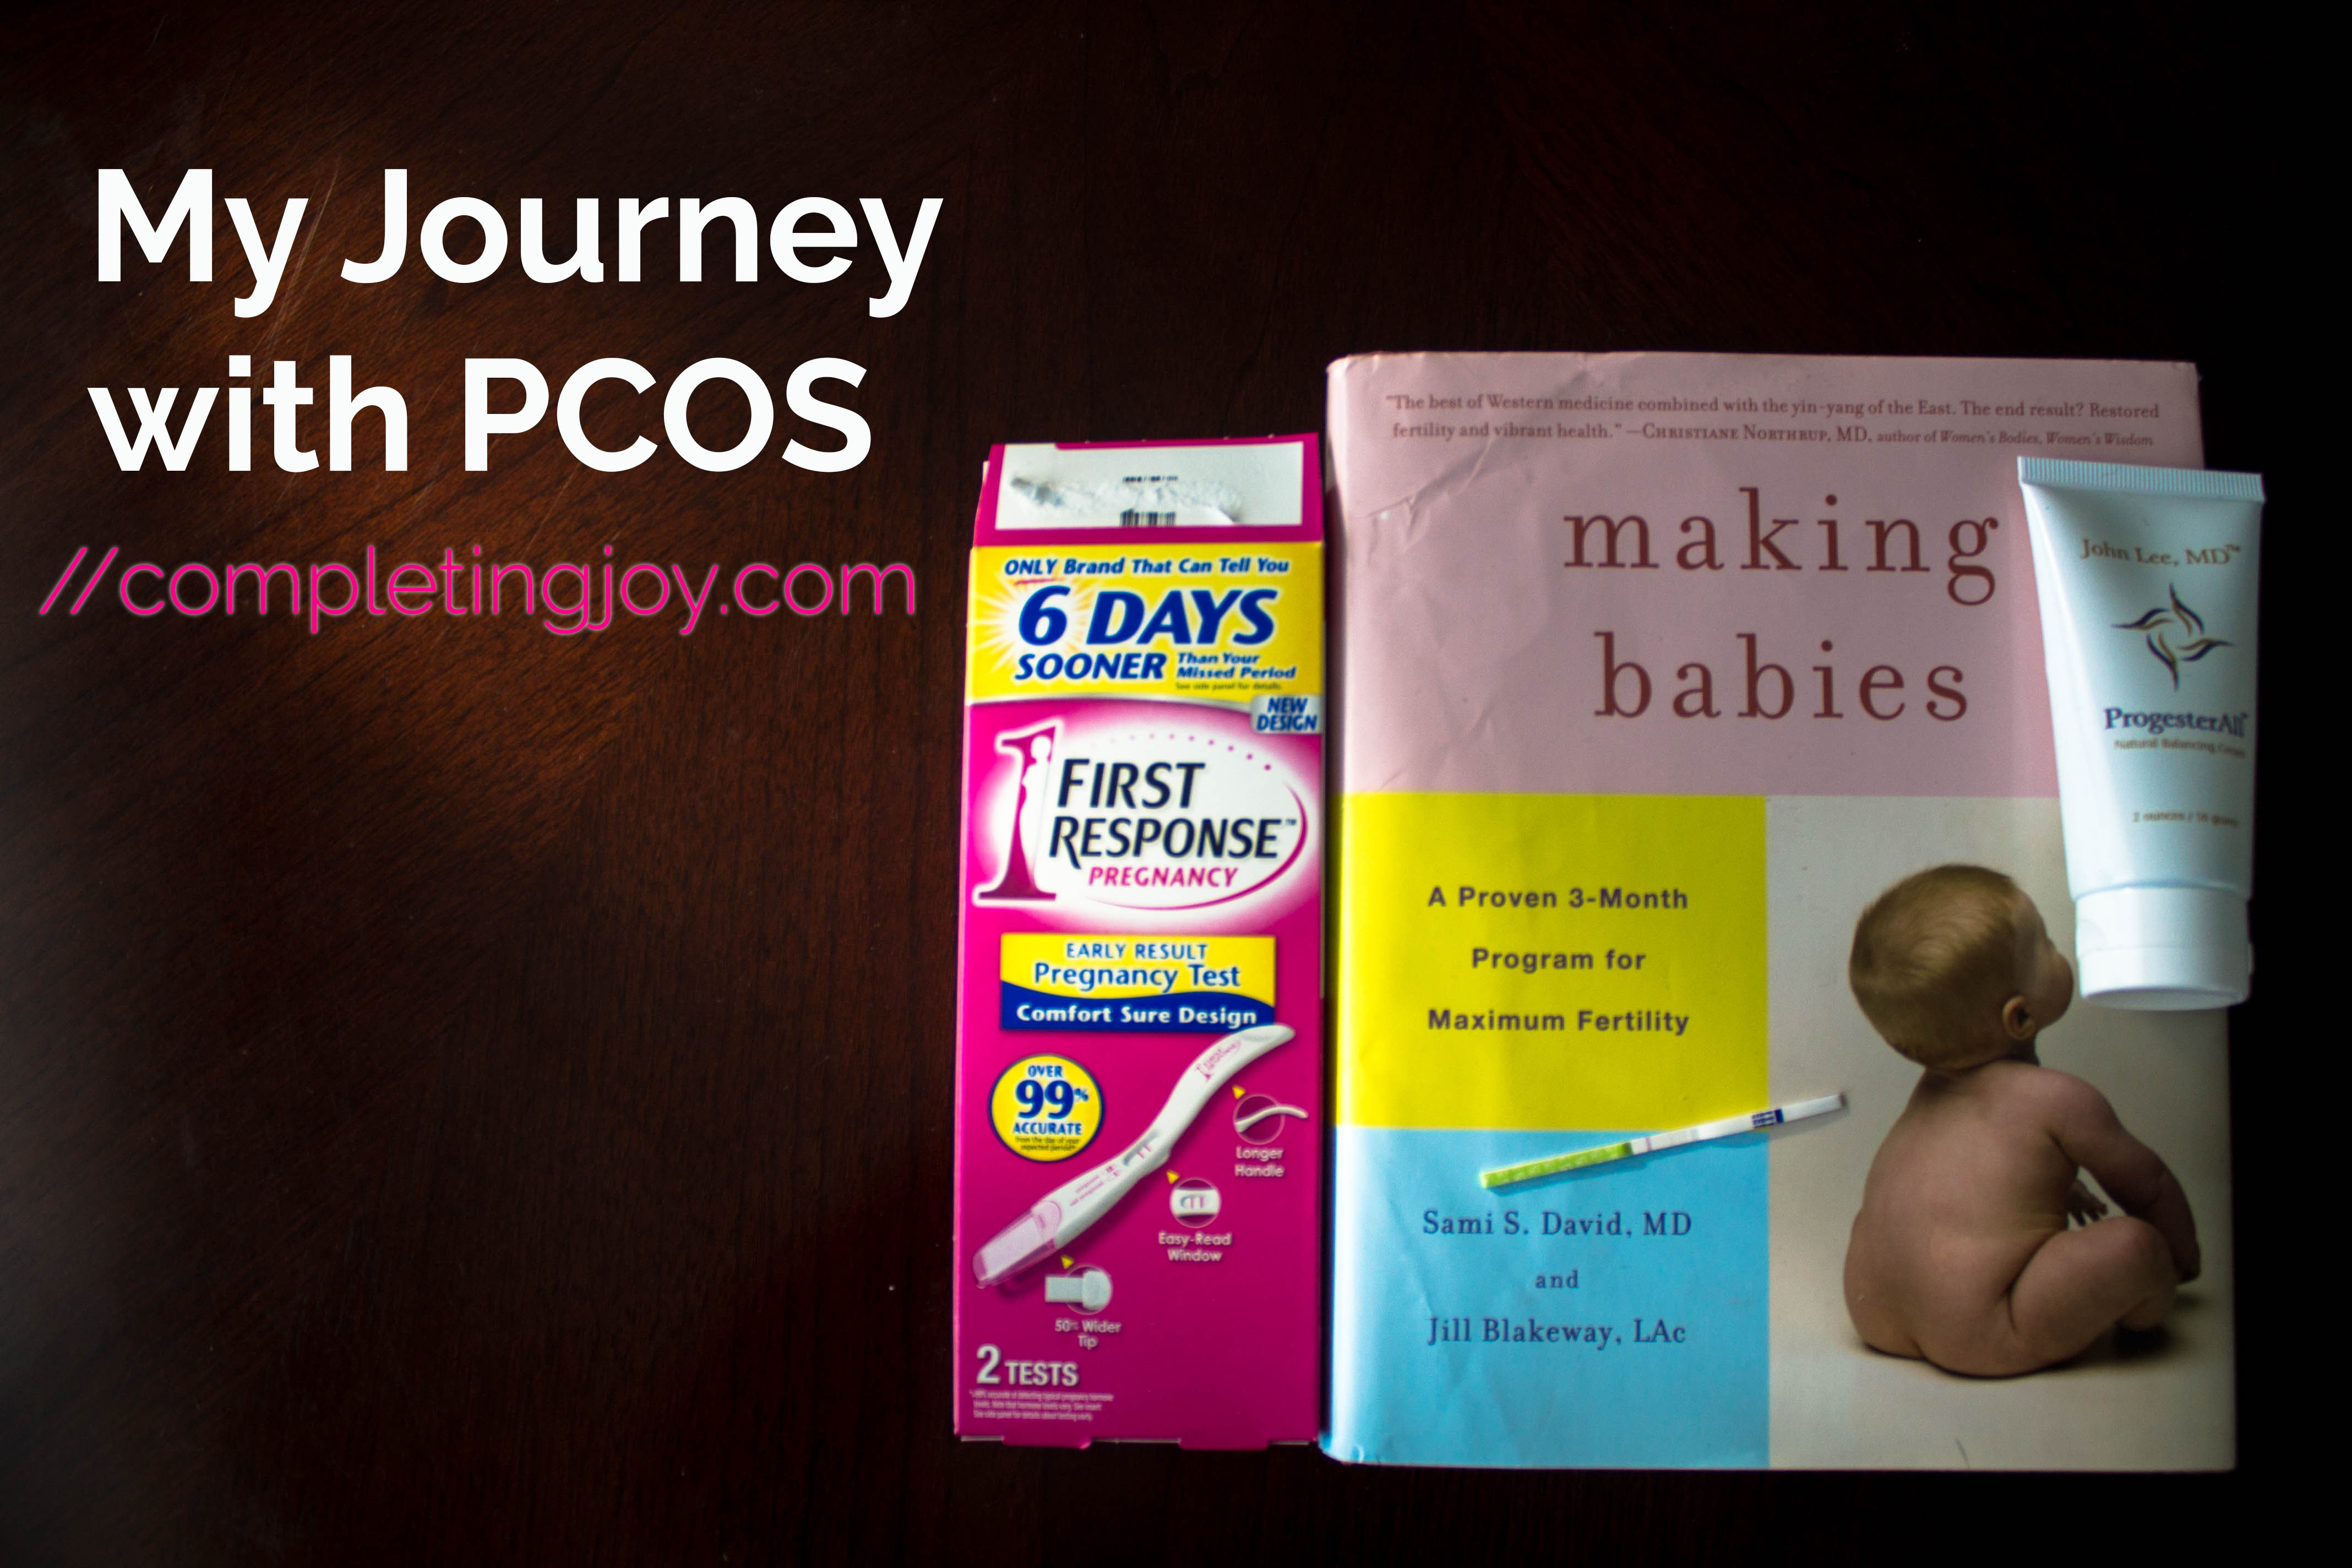 My Journey with PCOS